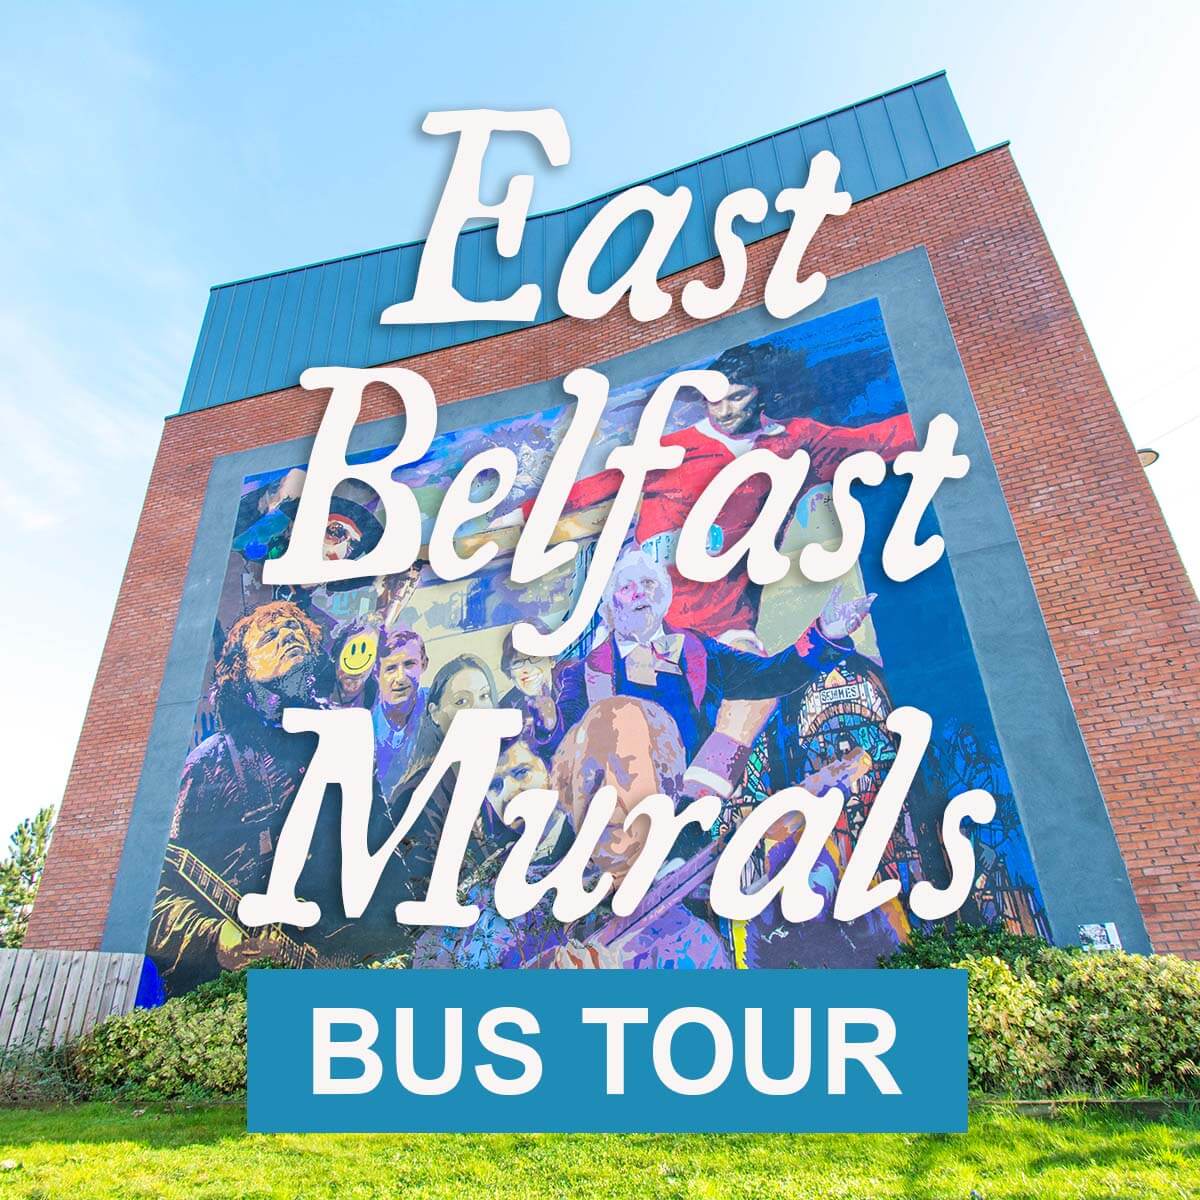 Belfast wall murals guided bus tours in Belfast and East Belfast Northern Ireland by Journey East Tours - square photo 7458